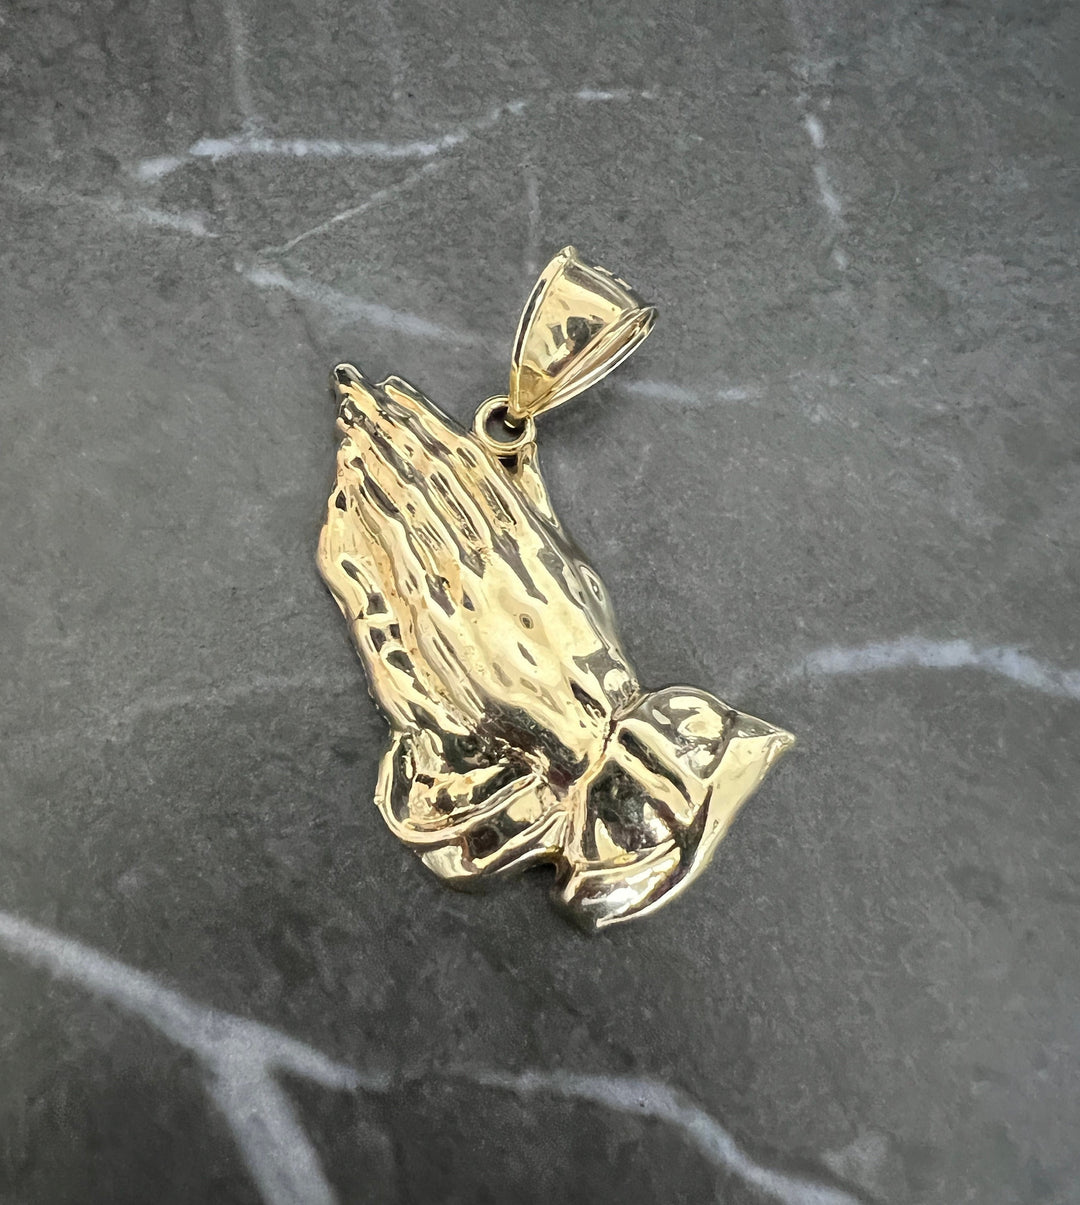 10K Authentic Yellow Gold Textured Praying Hands Pendant/Charm, Real Gold Praying Charm, The Lord's Prayer Hands, Christian and Baptism Gift